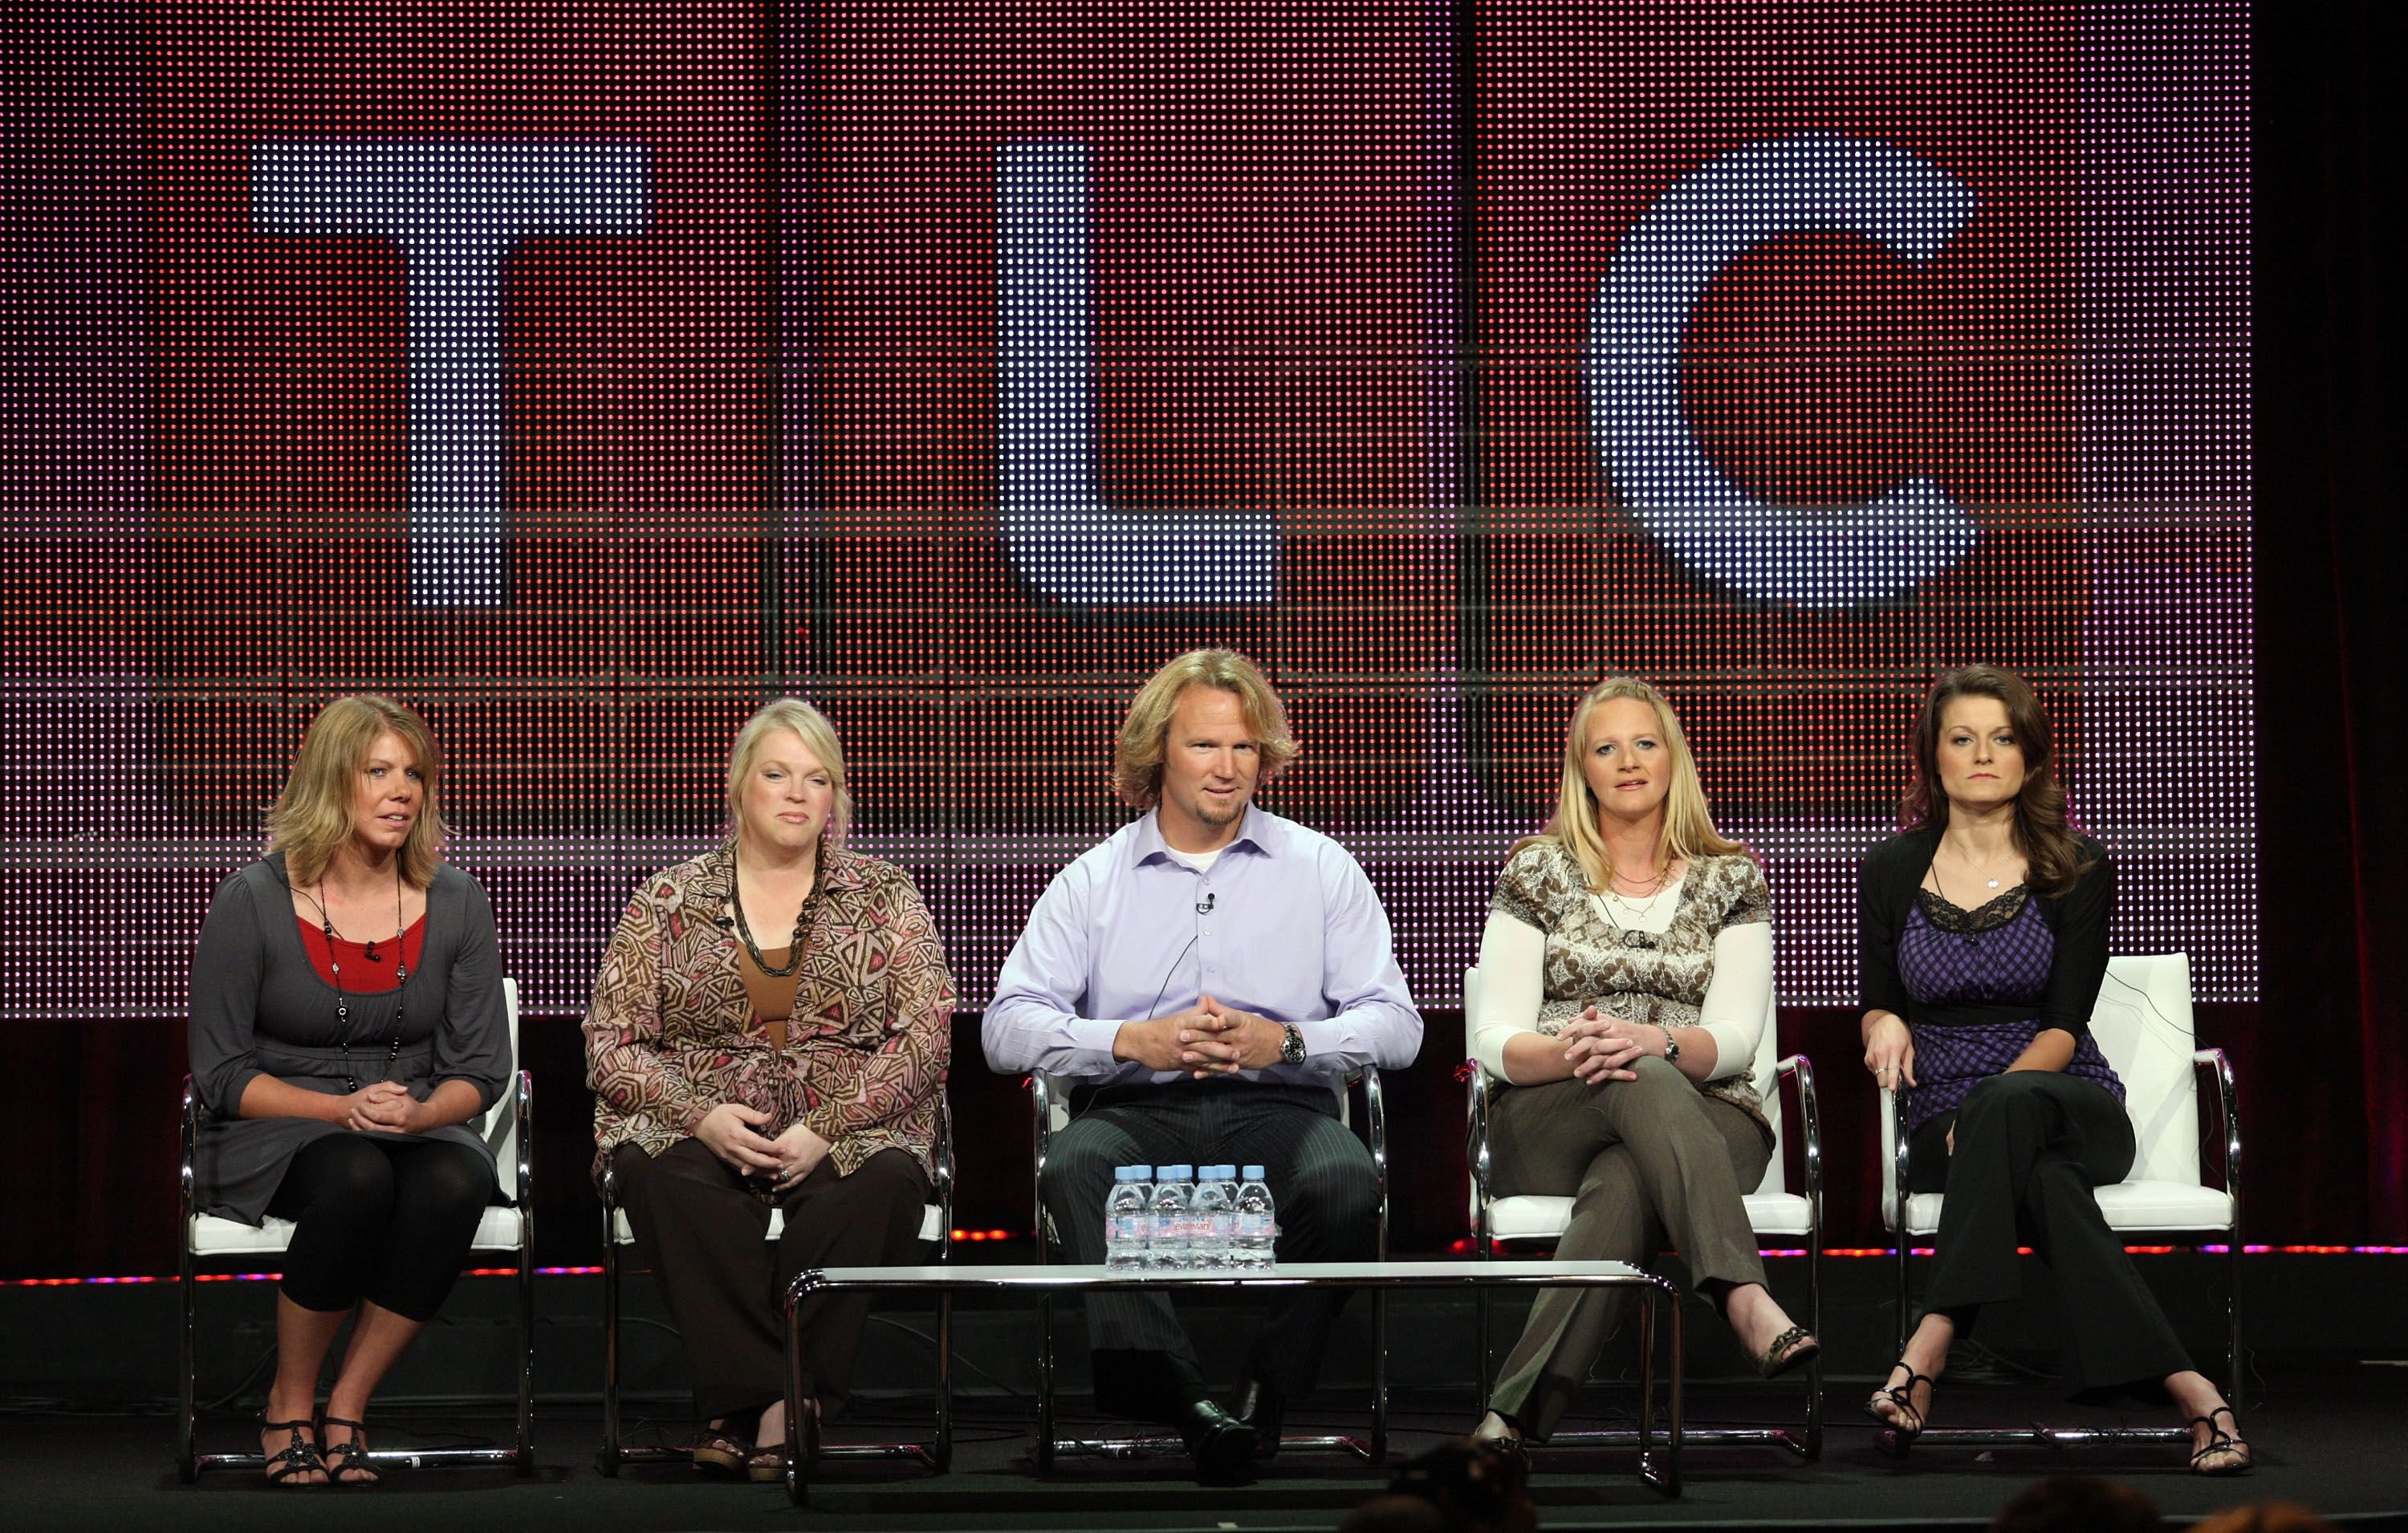 Meri, Janelle, Kody, Christine, and Robyn Brown from "Sister Wives" during the panel on the Summer TCA press tour on August 6, 2010 | Photo: Getty Images 